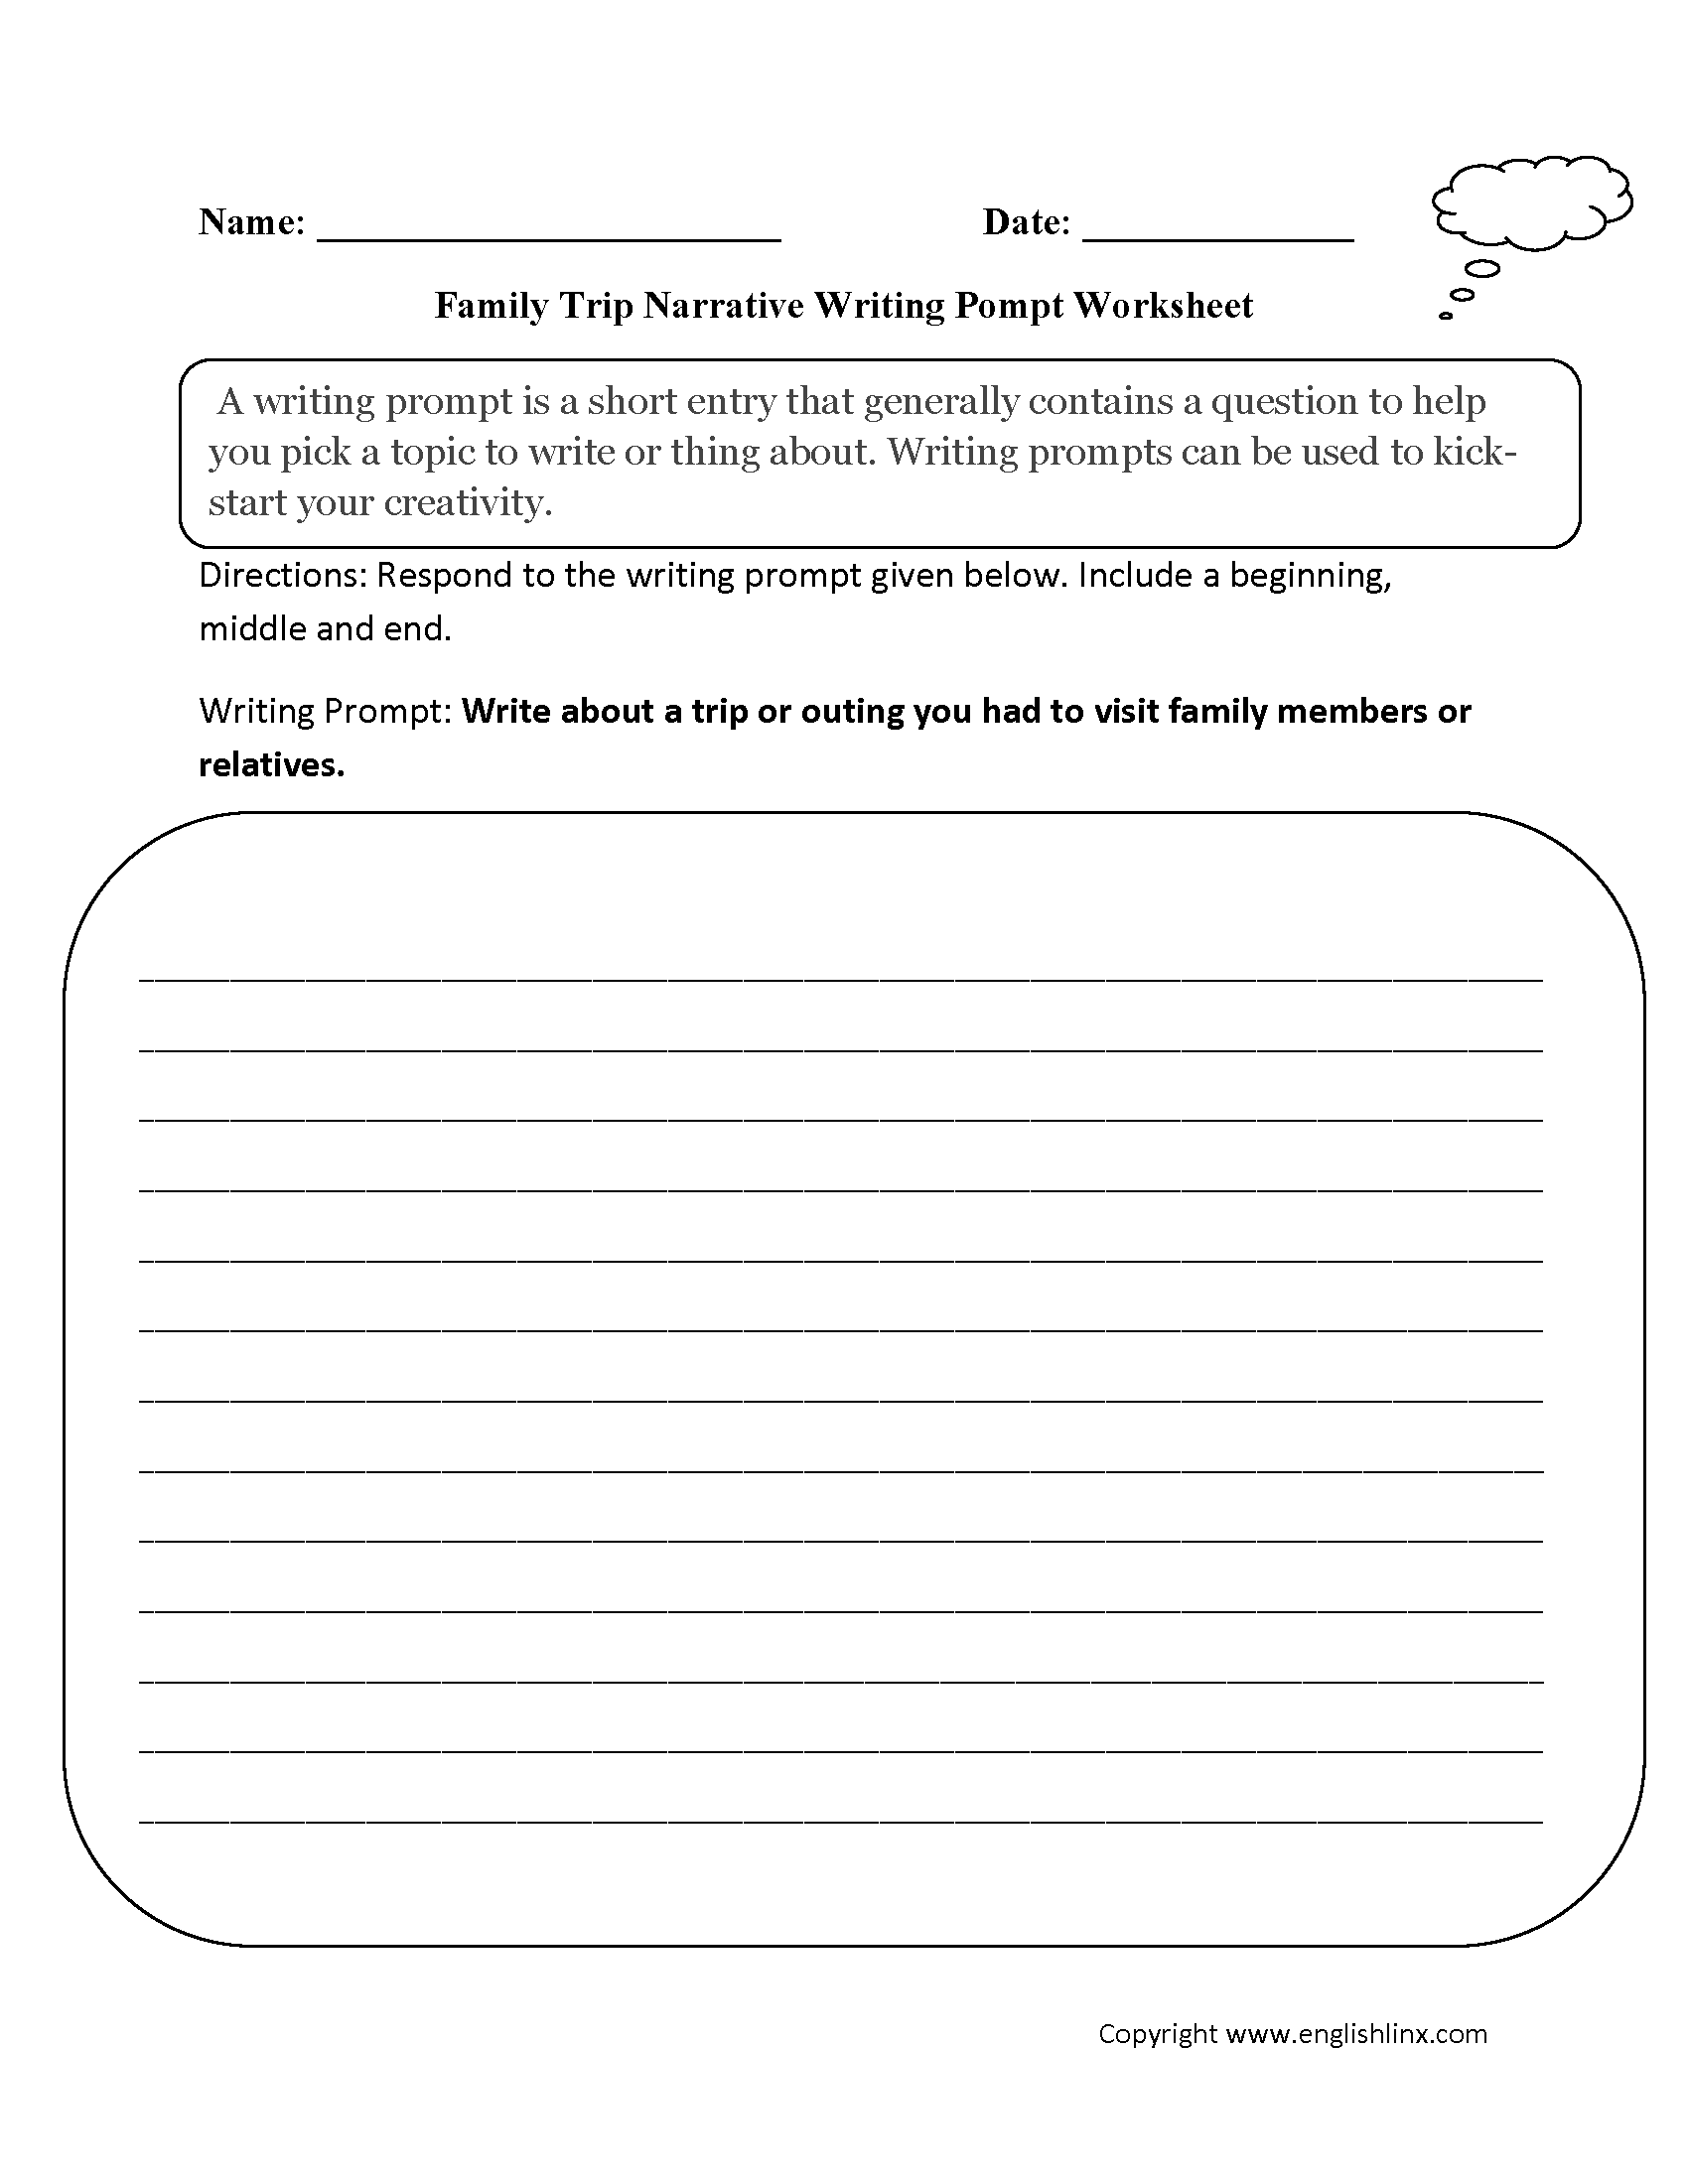 How to write an introductory paragraph for a descriptive essay